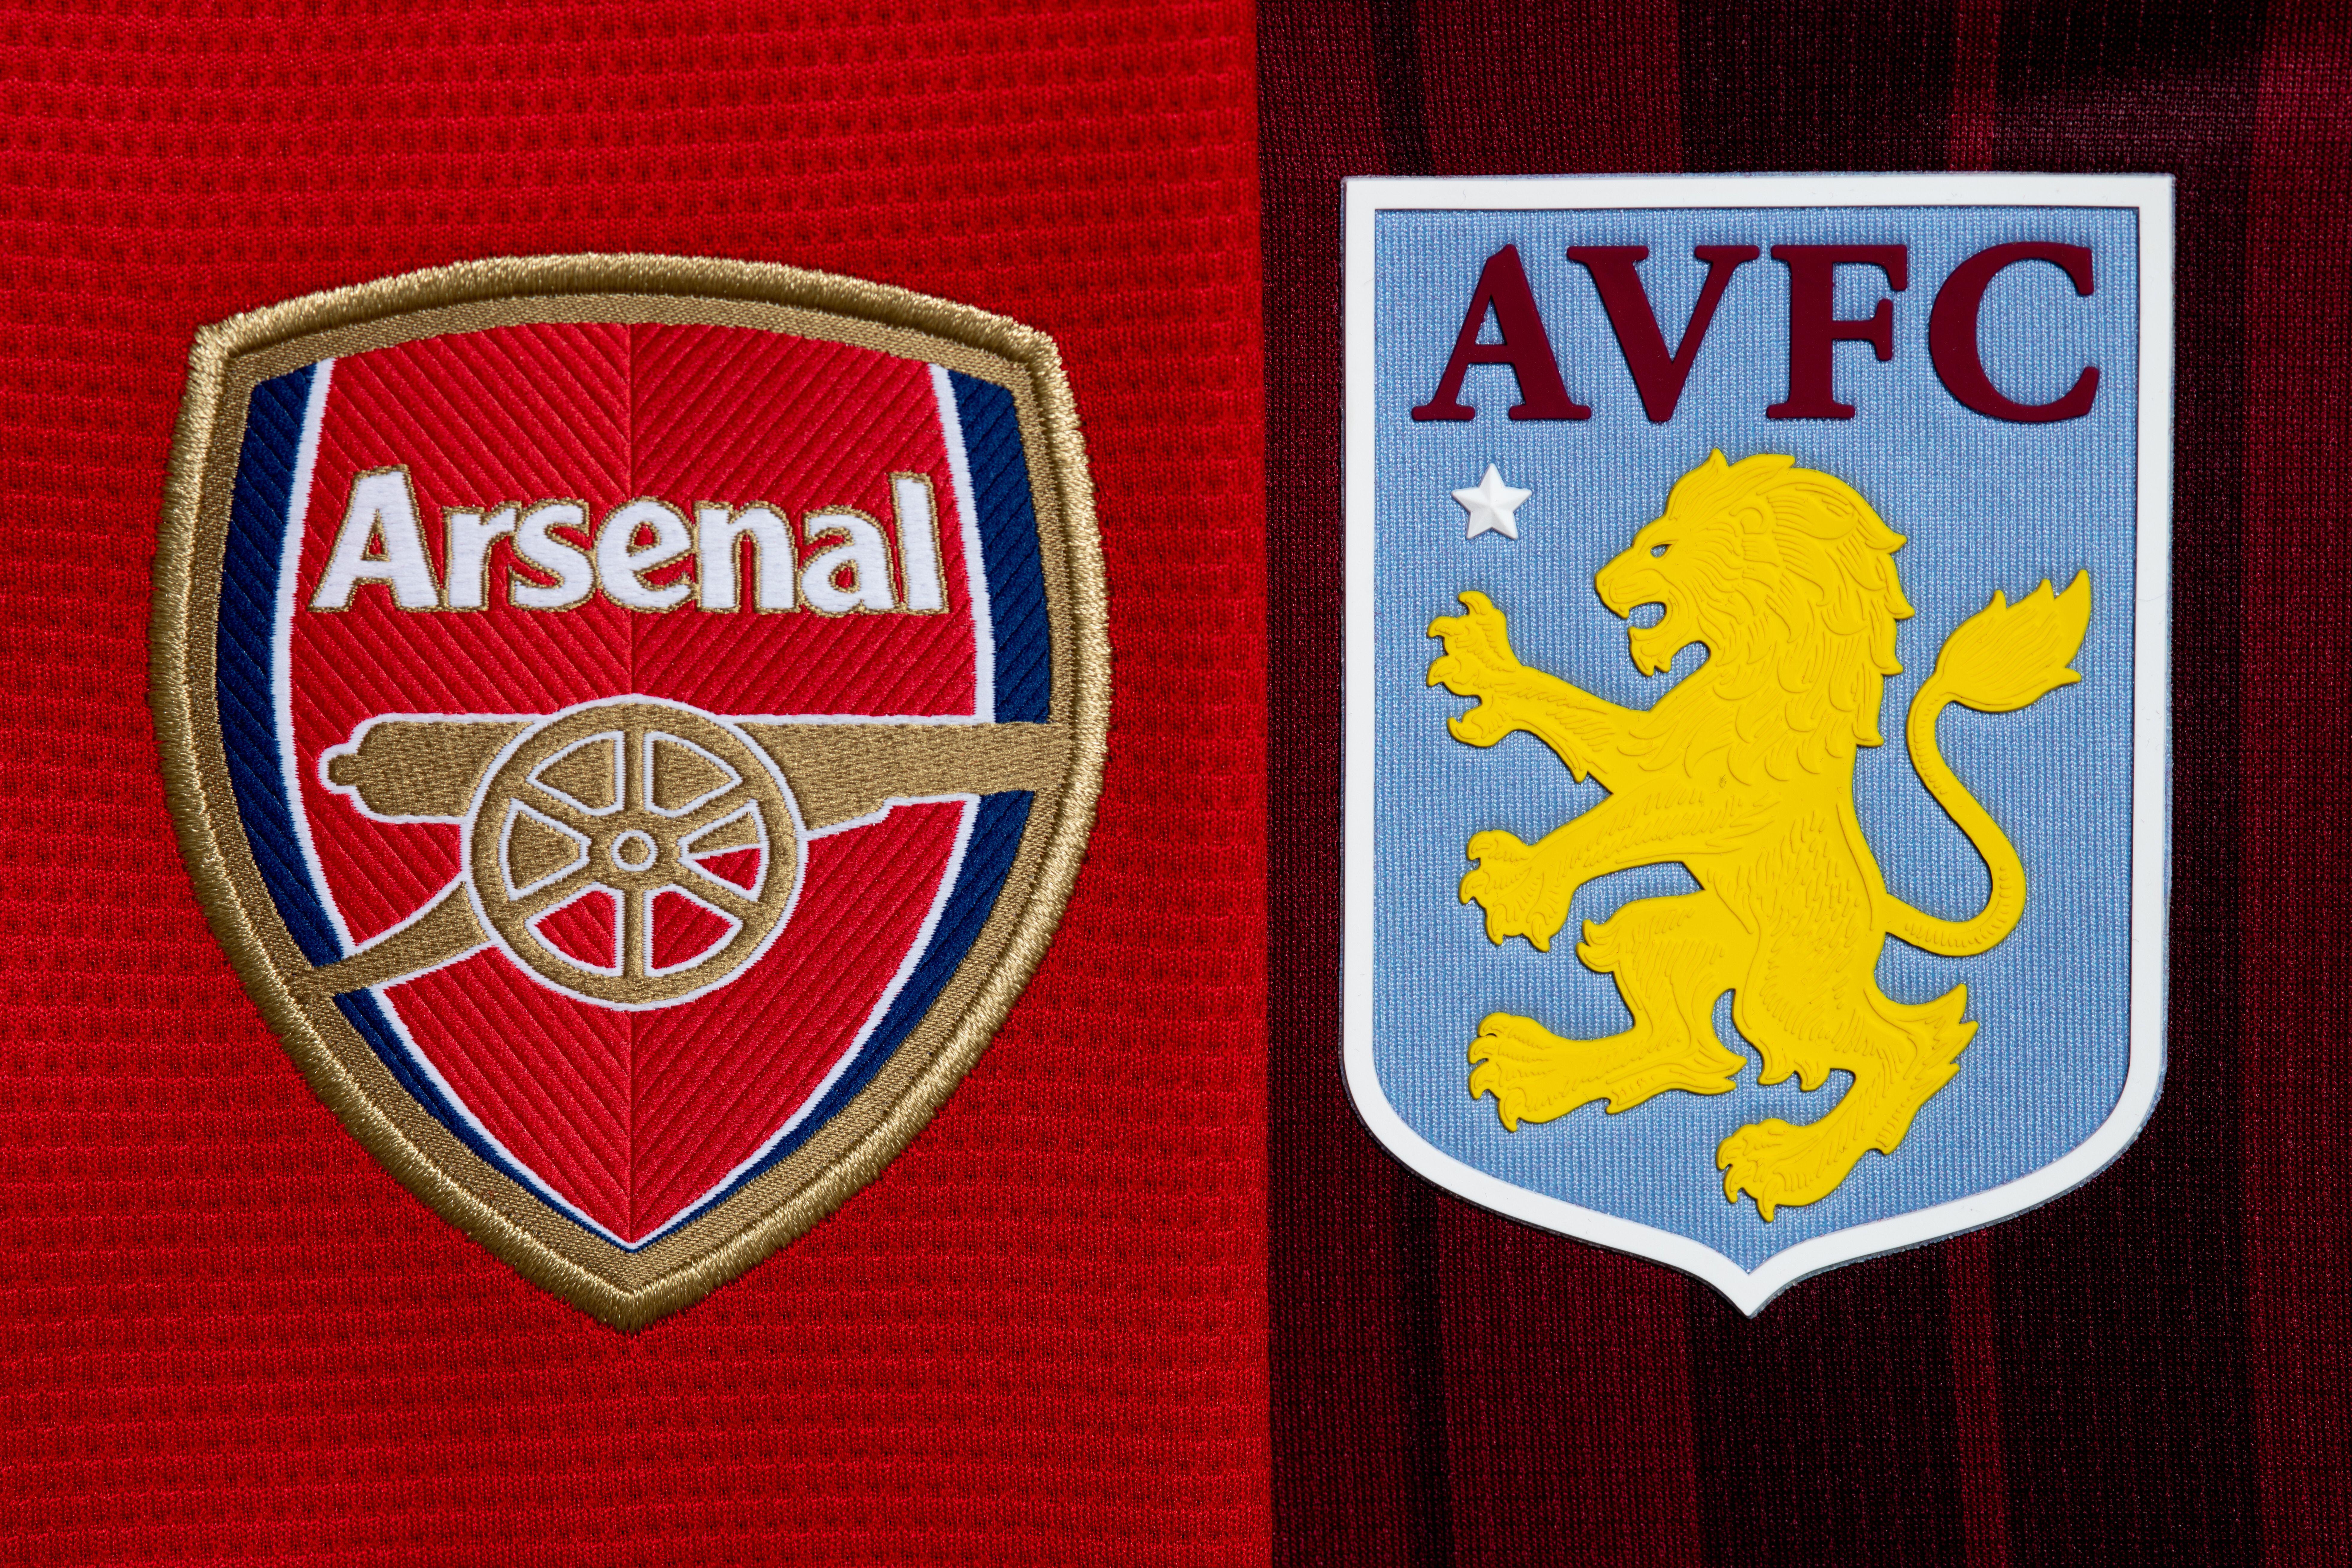 Aston Villa vs Arsenal betting tips Premier League preview, predictions, team news and odds